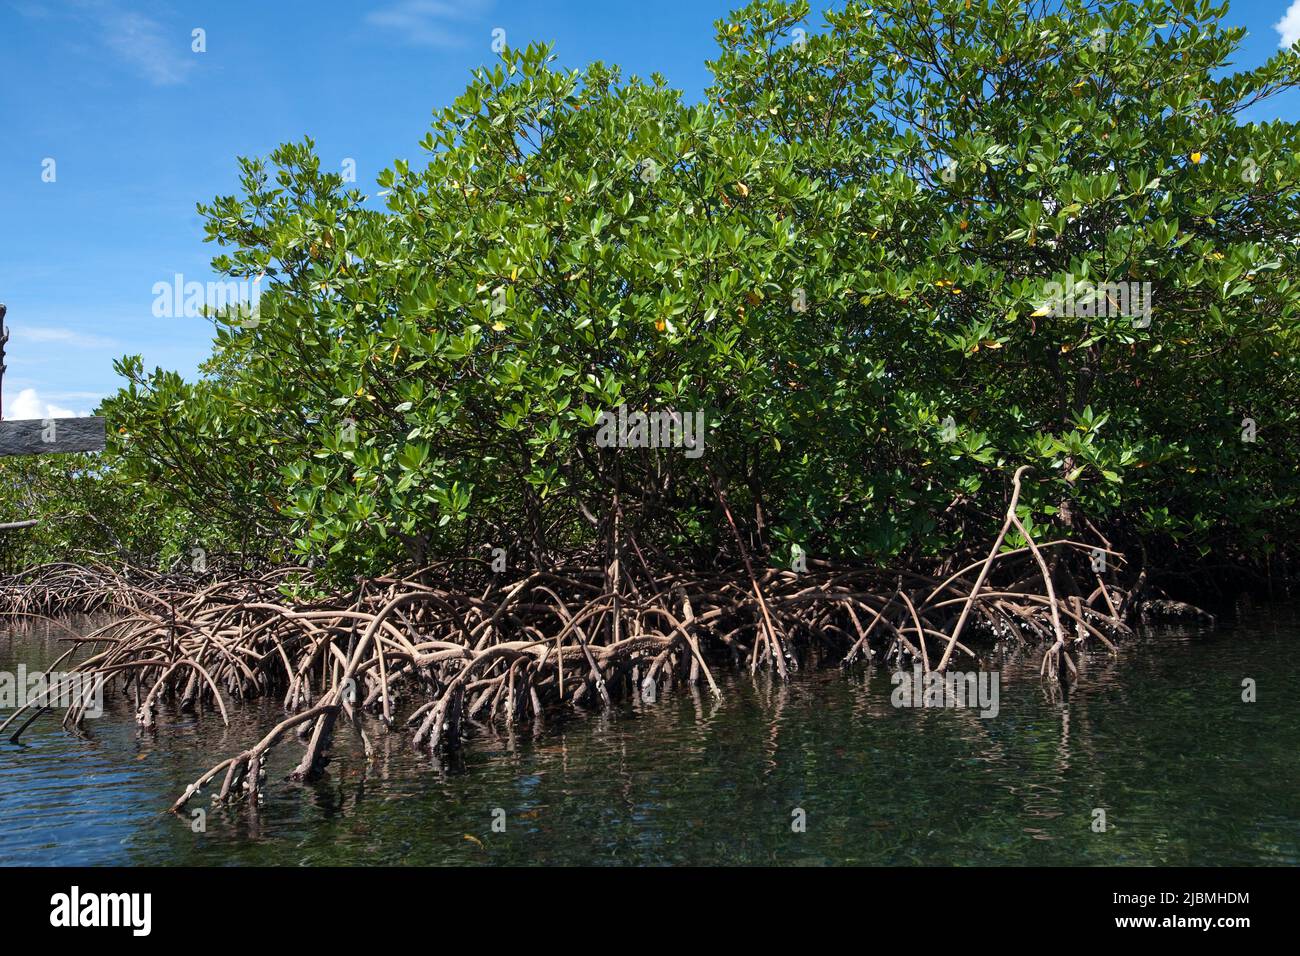 Panama, Archipielago de Bocas del Toro, Most of the islands of the archipel are surrounded by mangrove bushes. Stock Photo